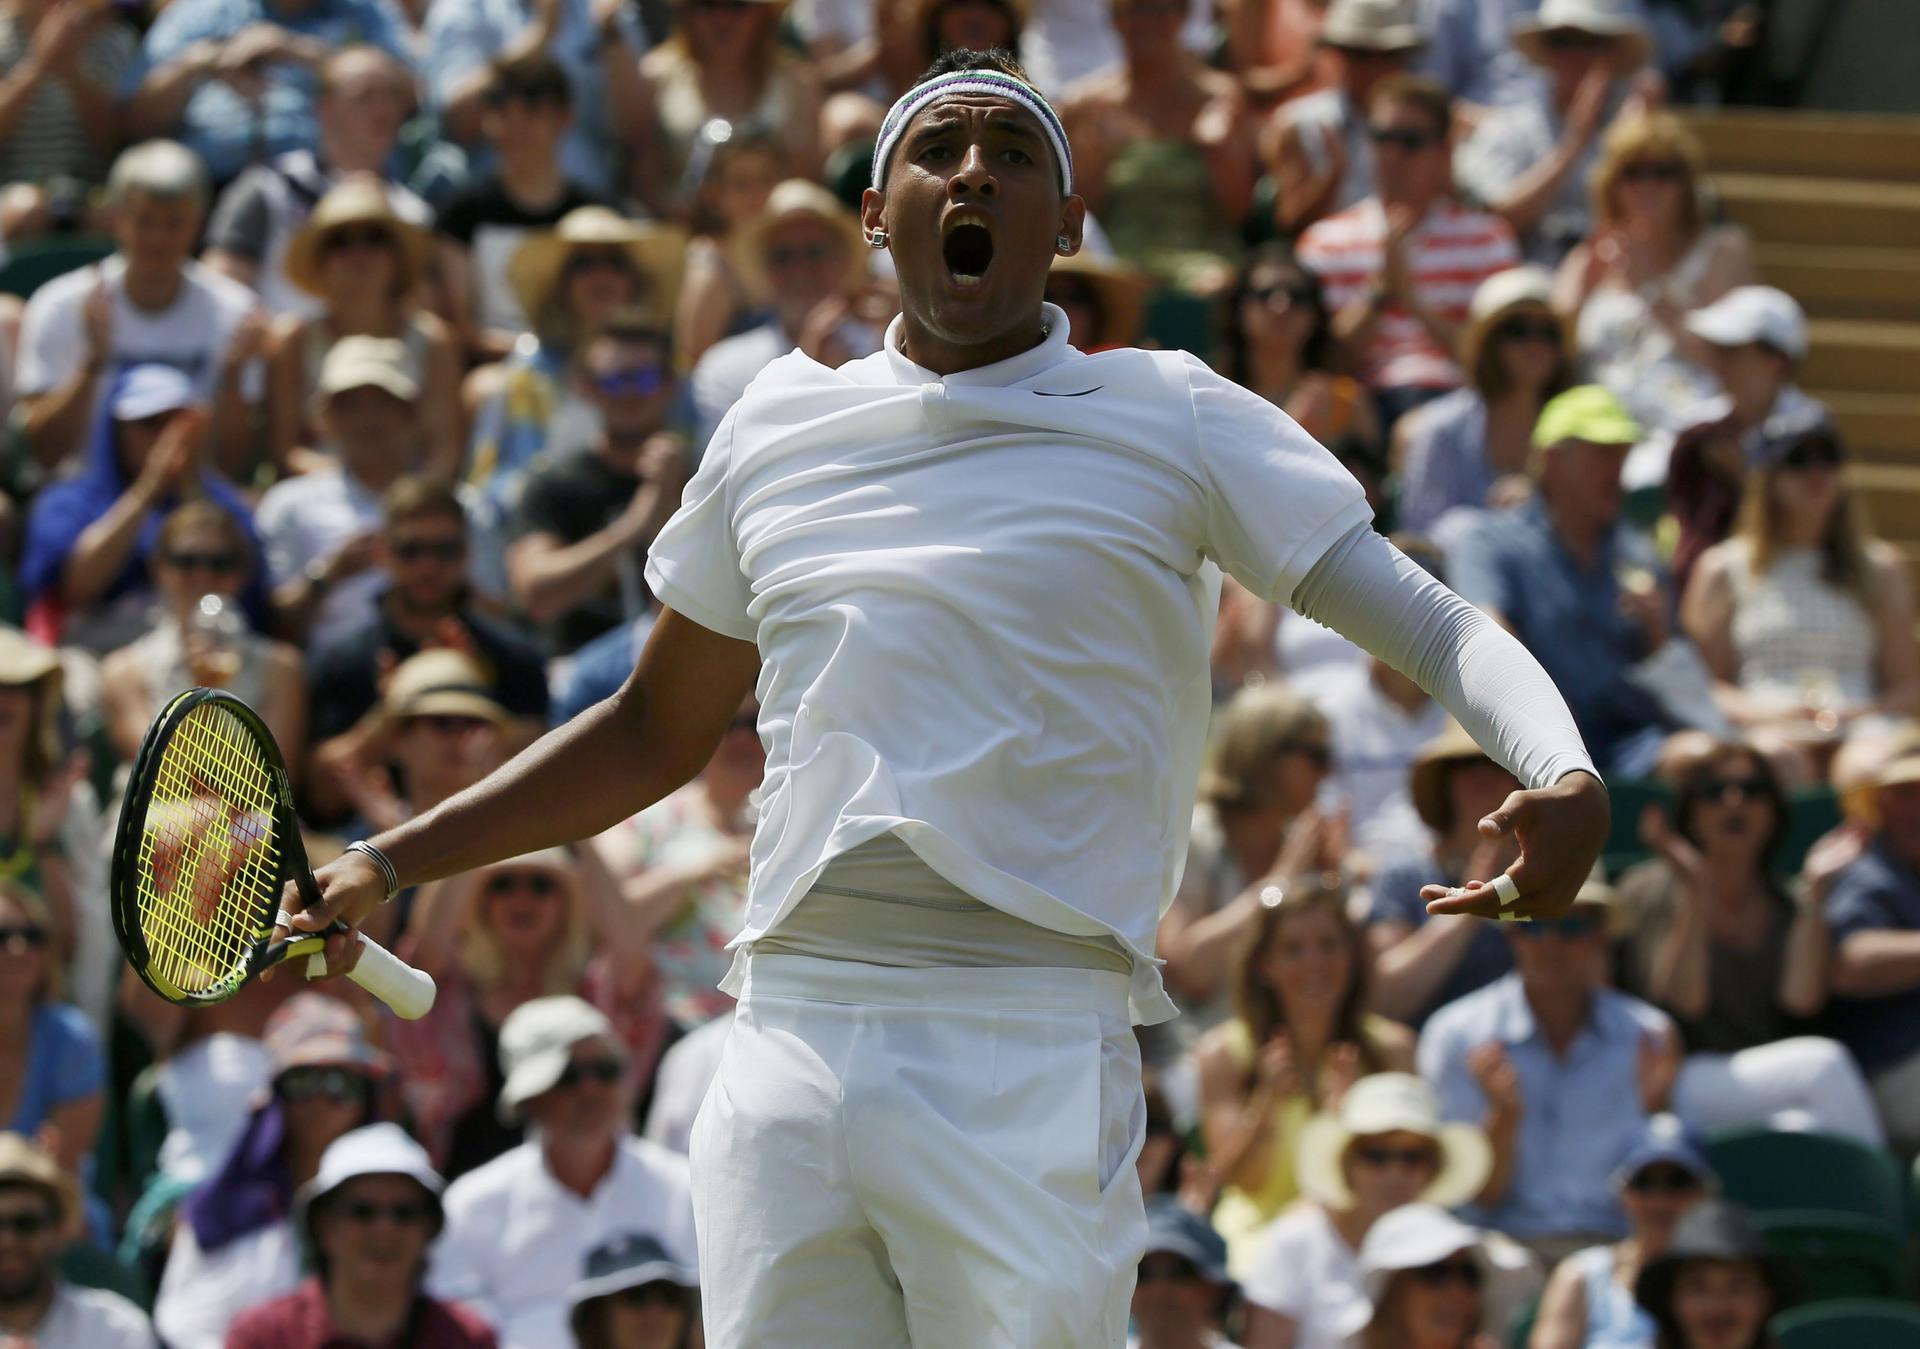 Australian Nick Kyrgios is fired up during his third-round match against Milos Raonic of Canada. Kyrgios had a four-set win over the seventh seed. Photo: Reuters